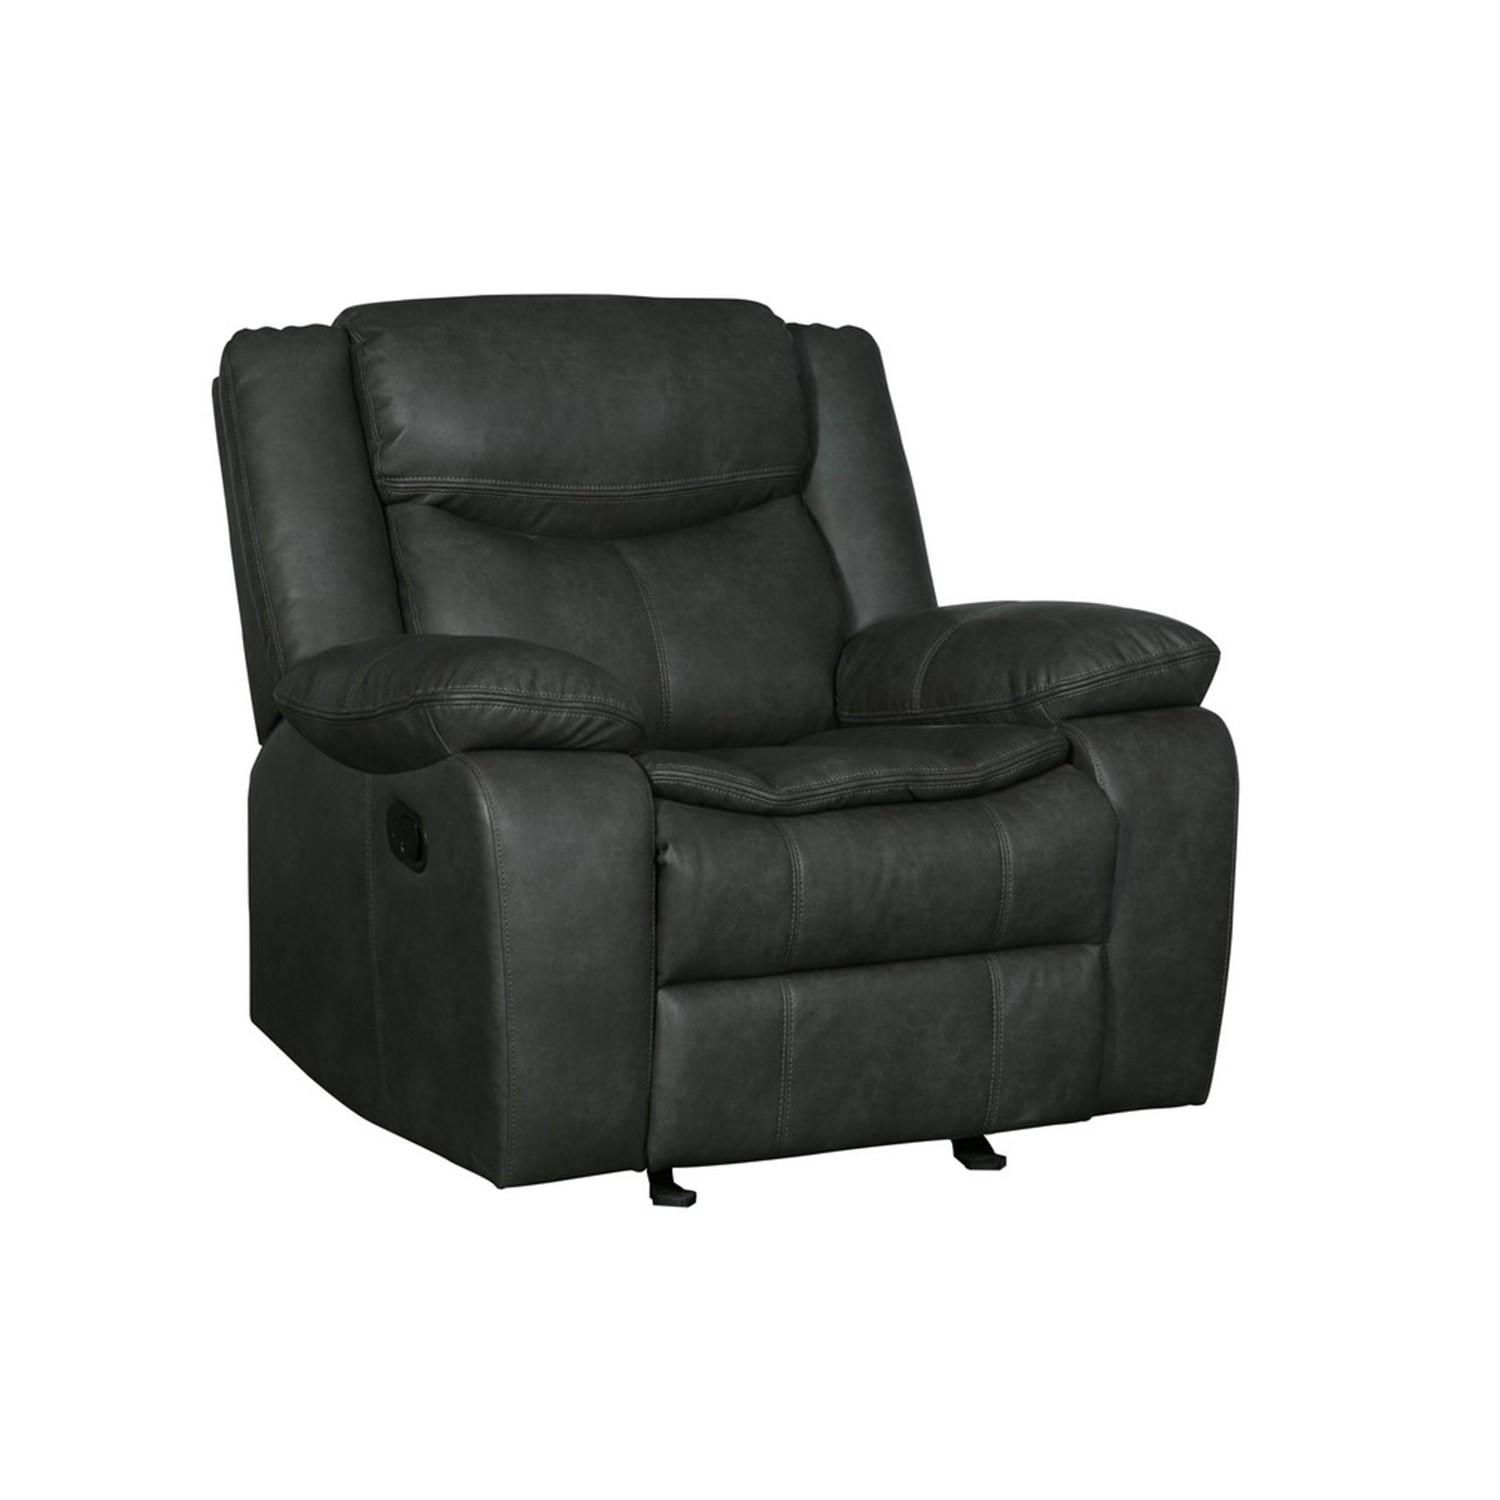 Contemporary Reclining Chair 6967 Reclining Chair 6967-GRAY-CH 6967-GRAY-CH in Gray leather Air